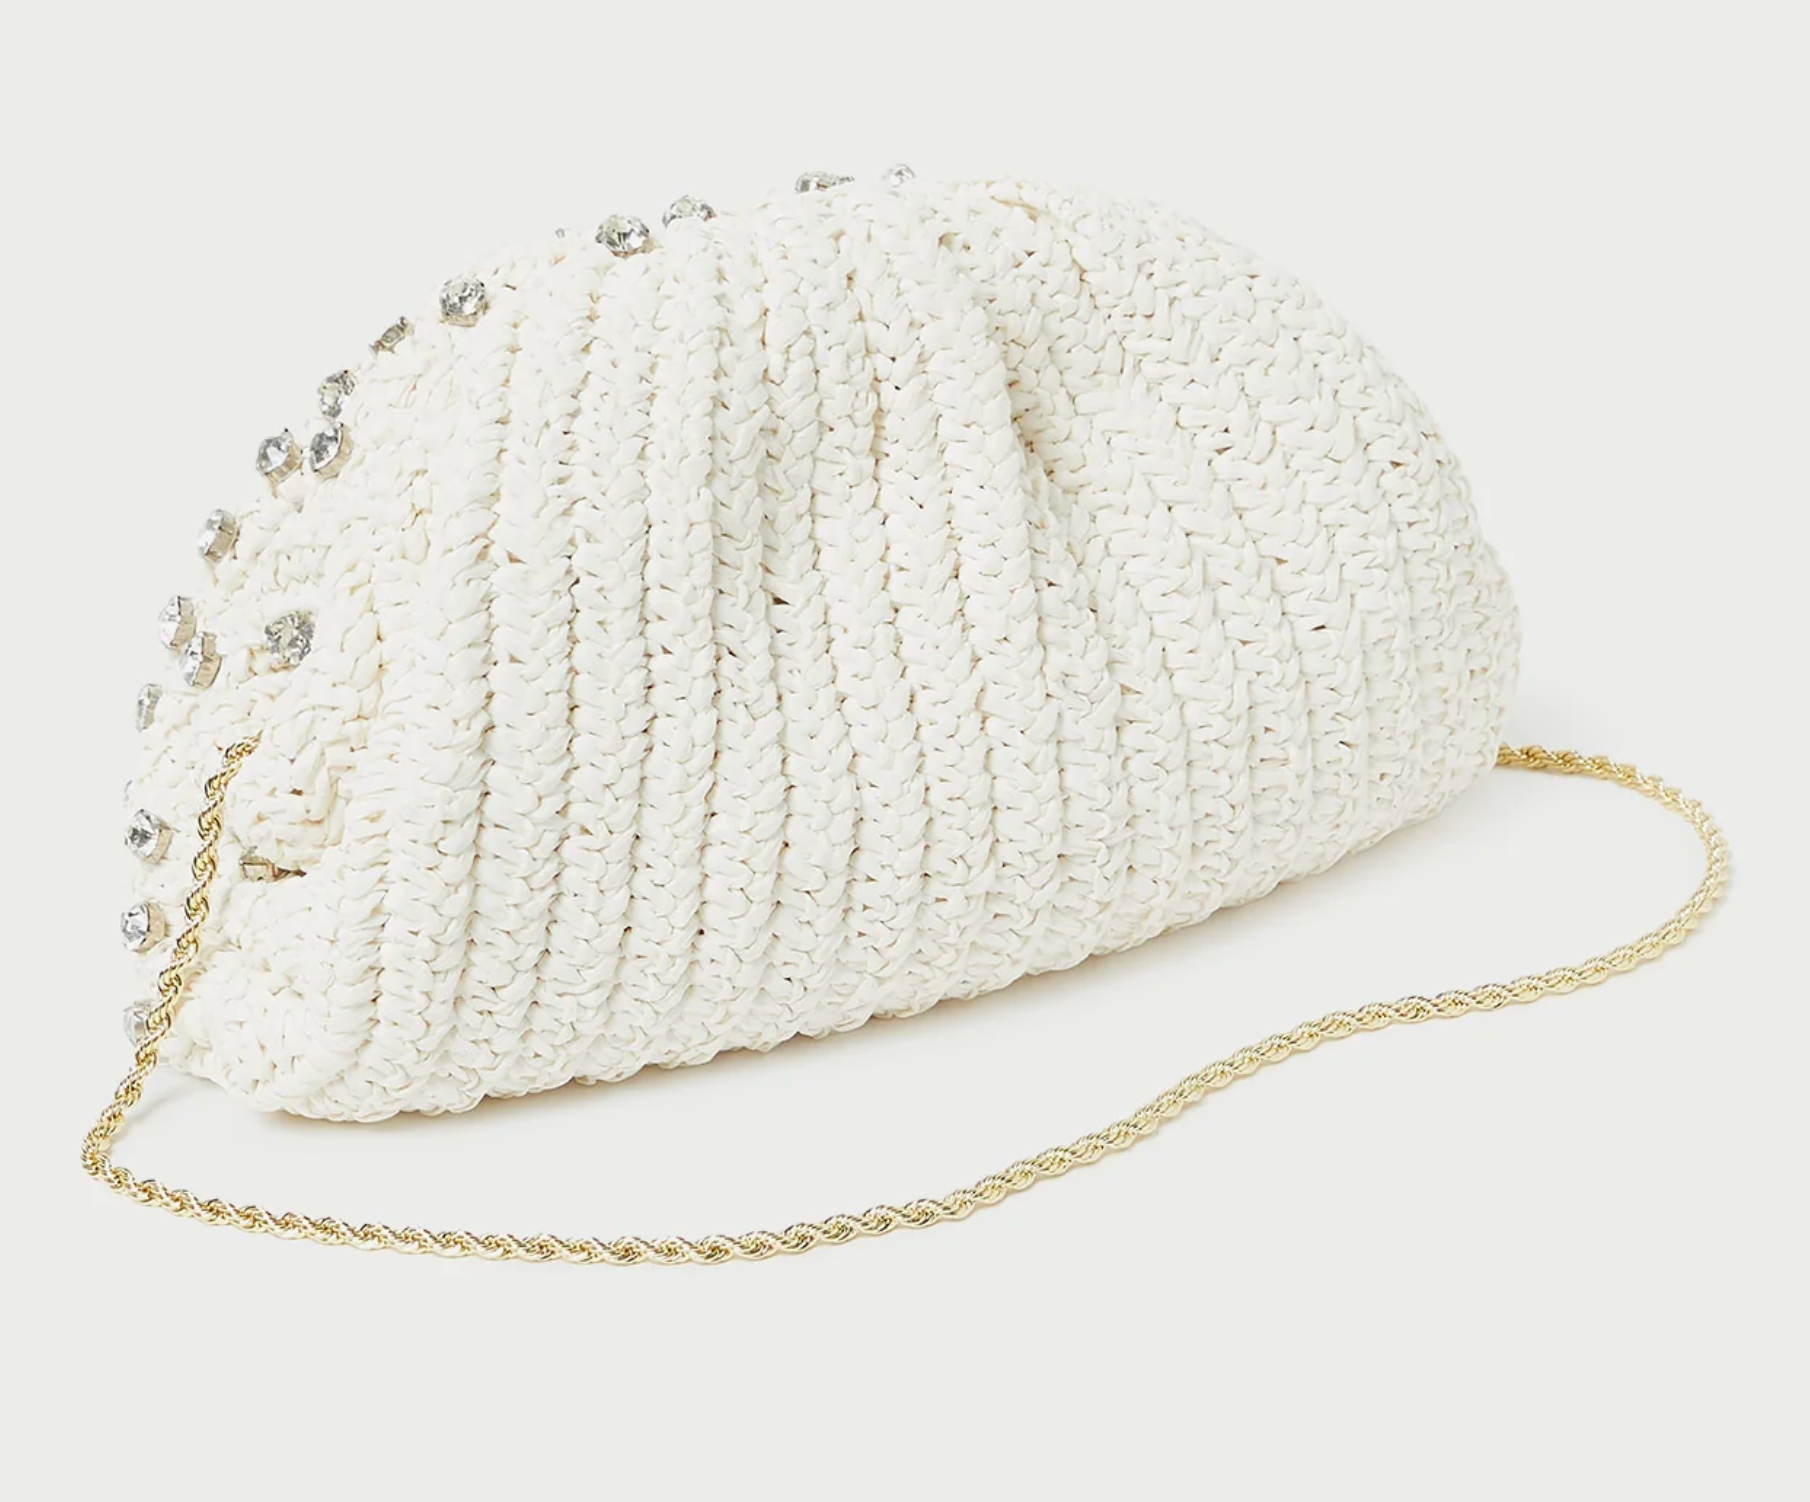 Dome-shaped frame pouch in natural crocheted raffia with rhinestone embellishment. Features a removable twisted gold metal shoulder strap, frame closure, full lining, and interior card slot